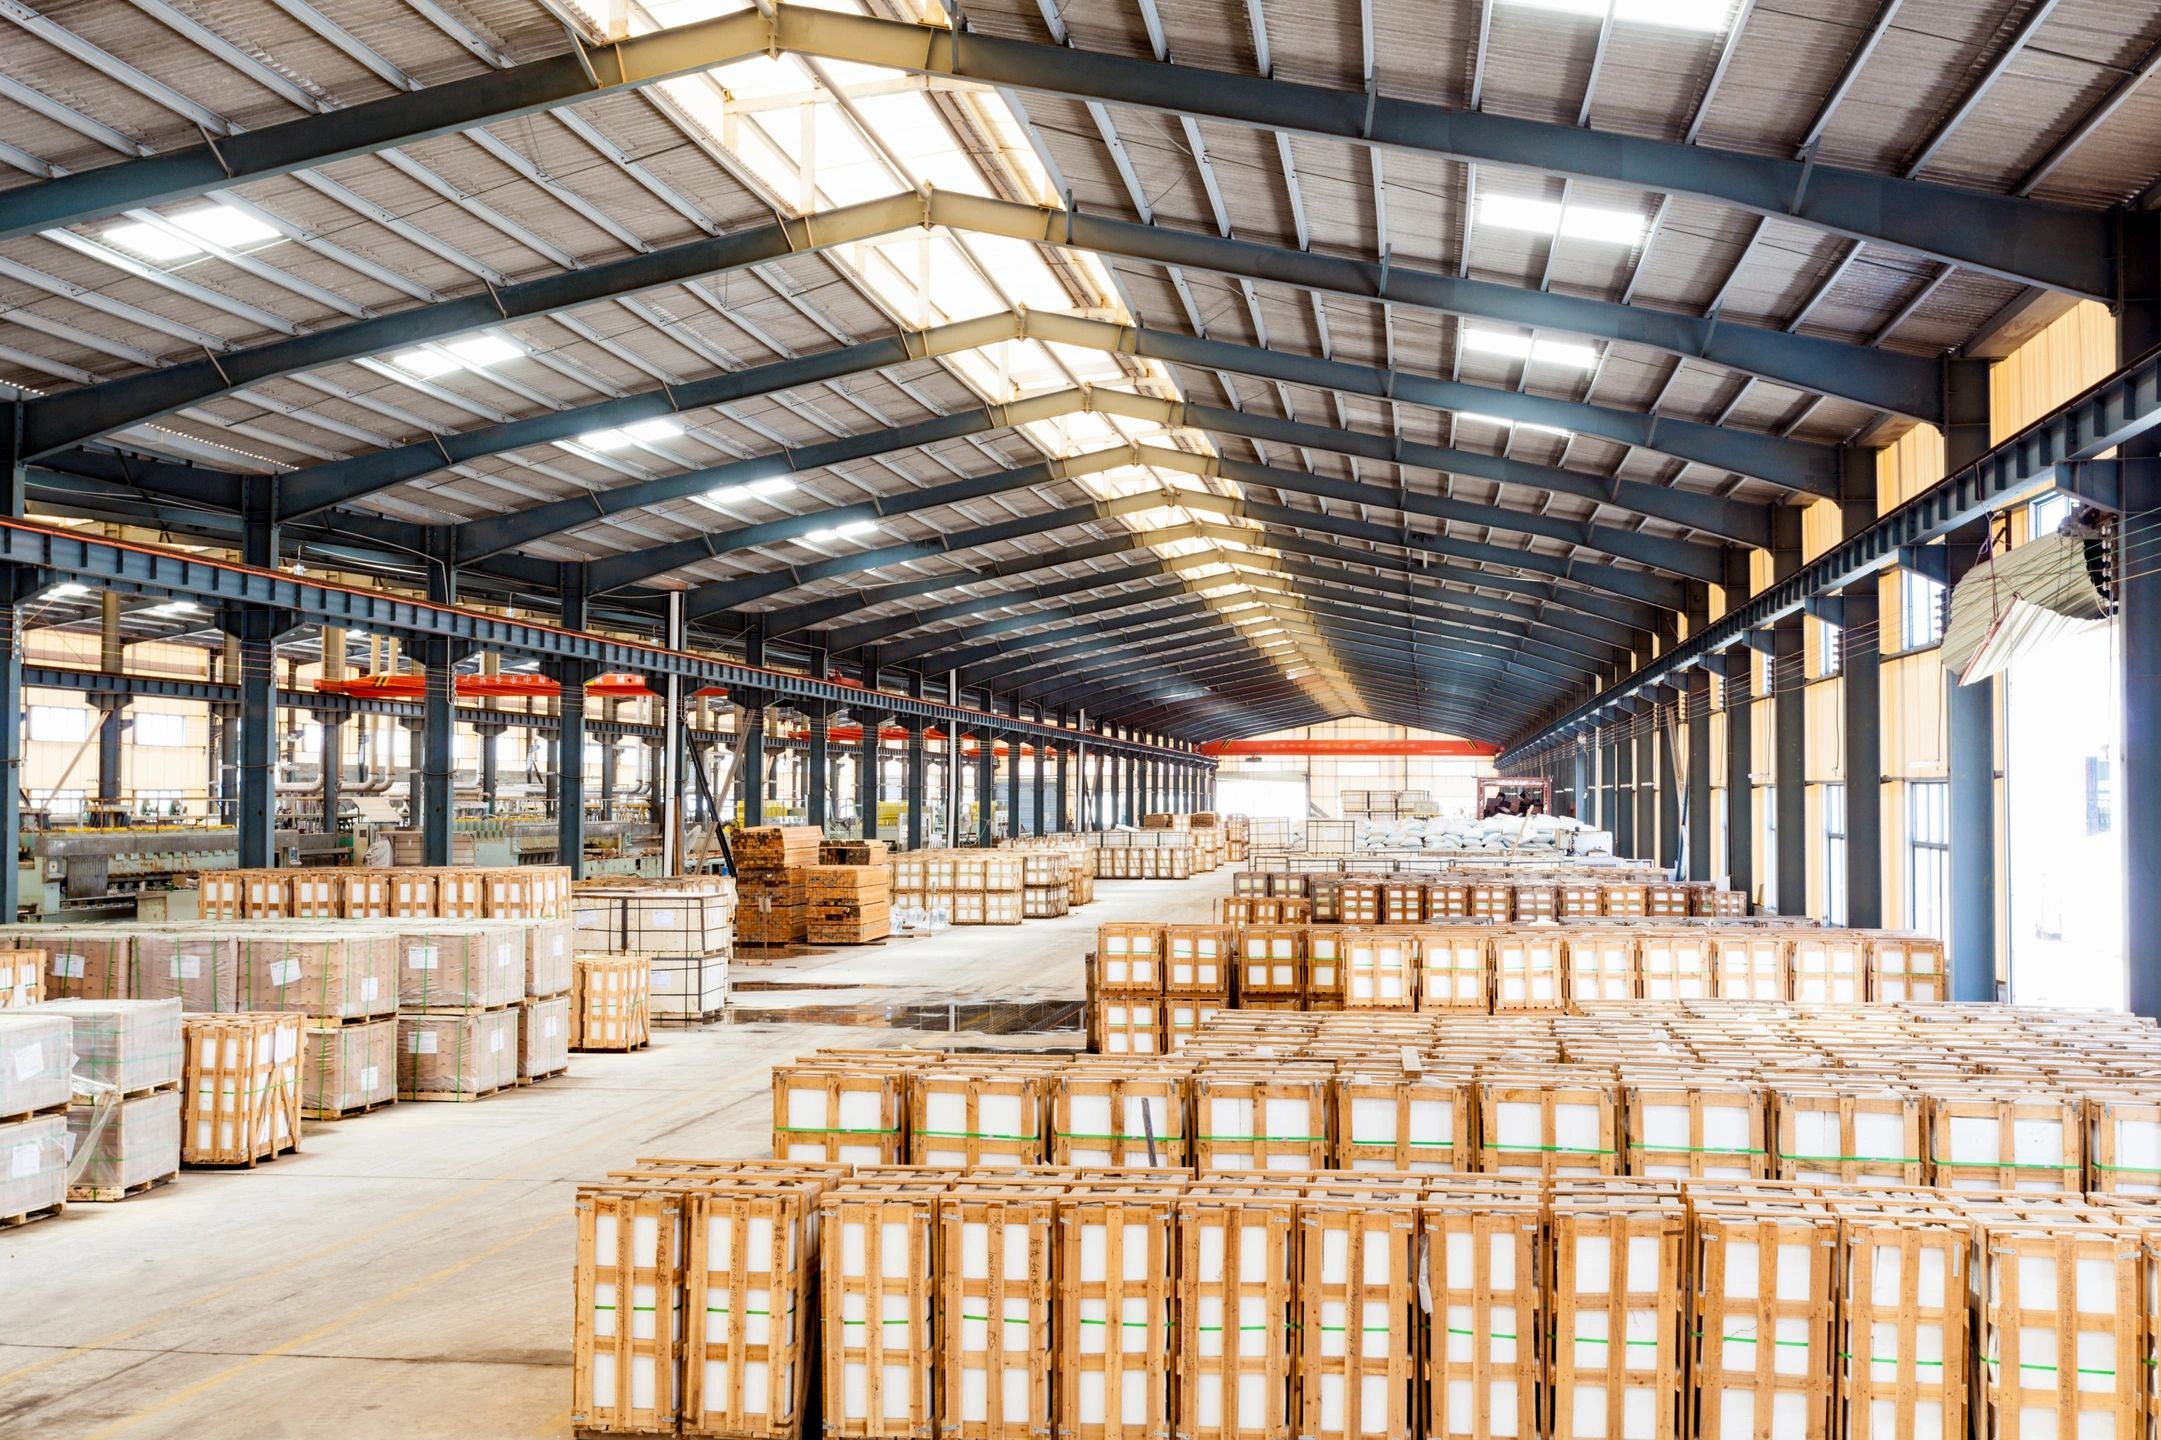 As cleaning experts, Global Clean provides warehouse cleaning in The Greater Toronto Area and Toronto Area. In summary, we help warehouses maintain a clean property. 